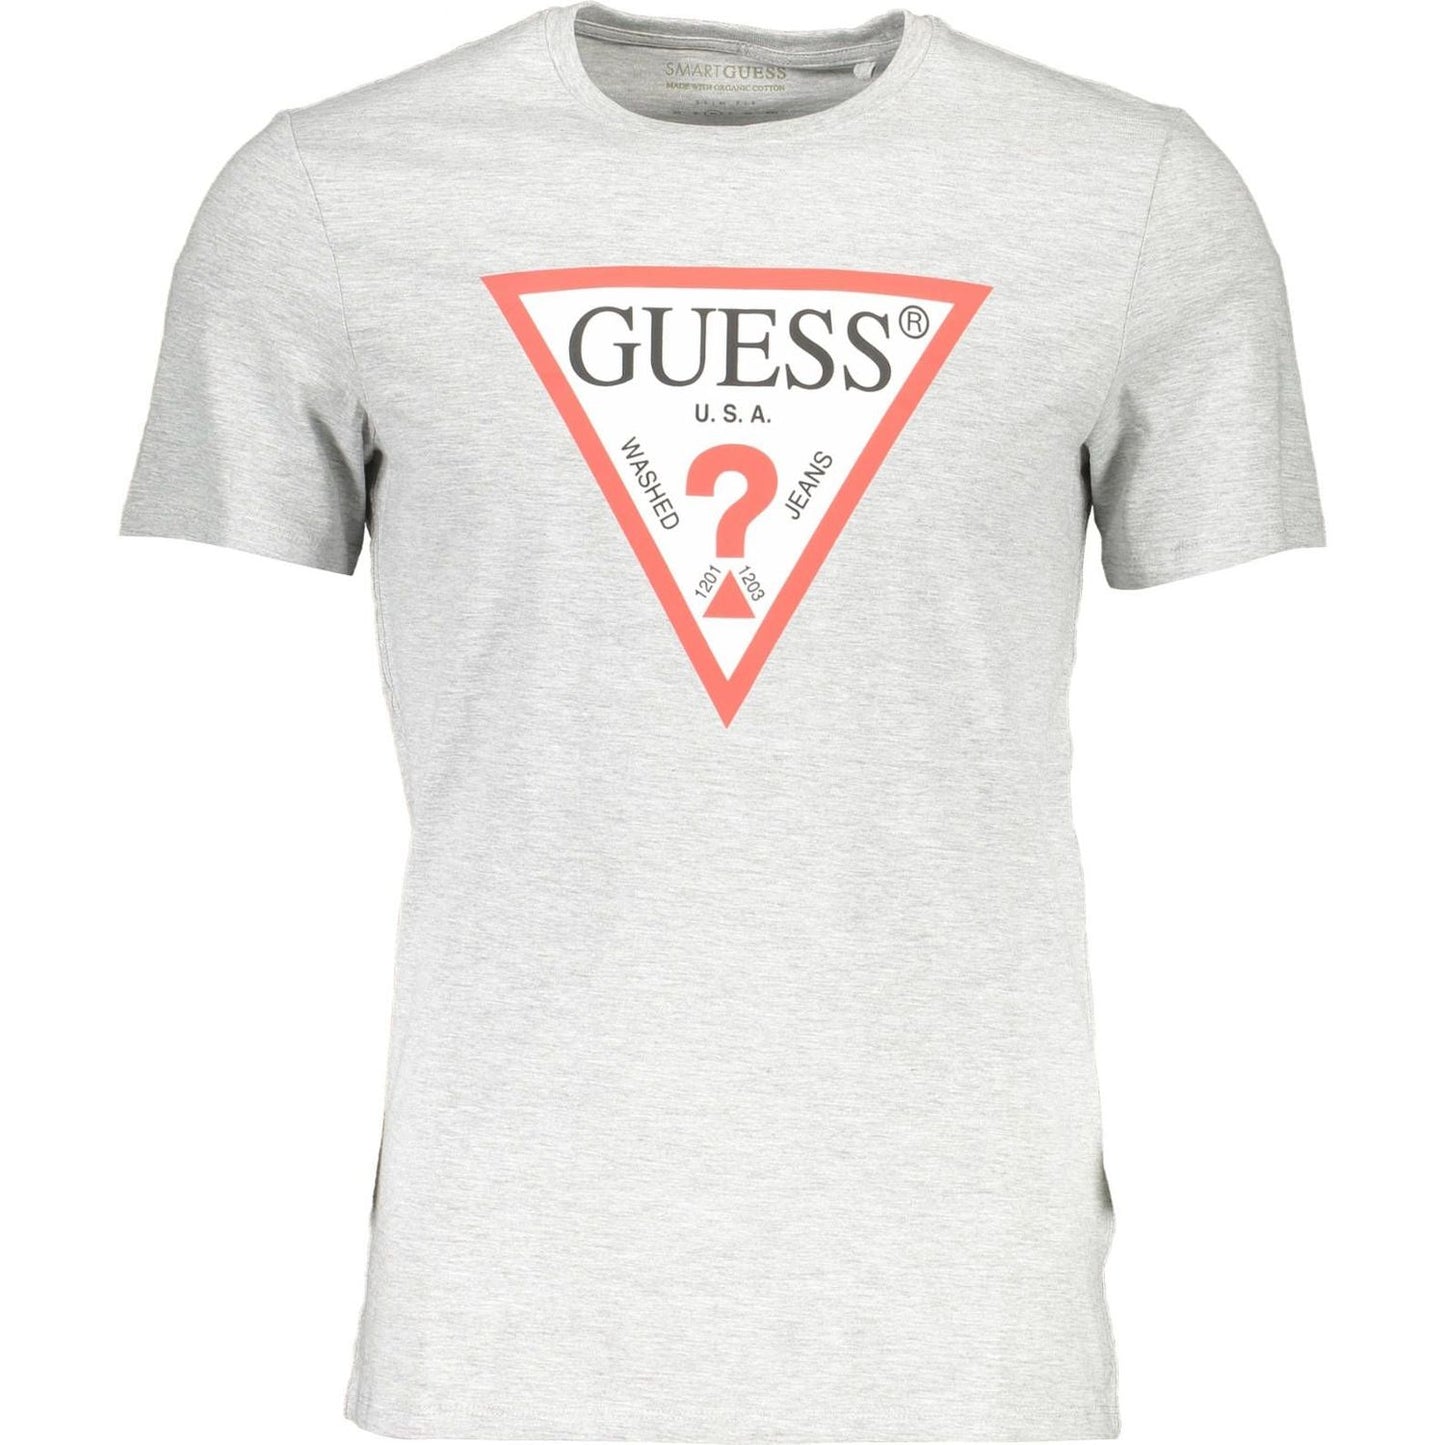 Guess Jeans Chic Gray Slim Fit Logo Tee chic-gray-slim-fit-logo-tee